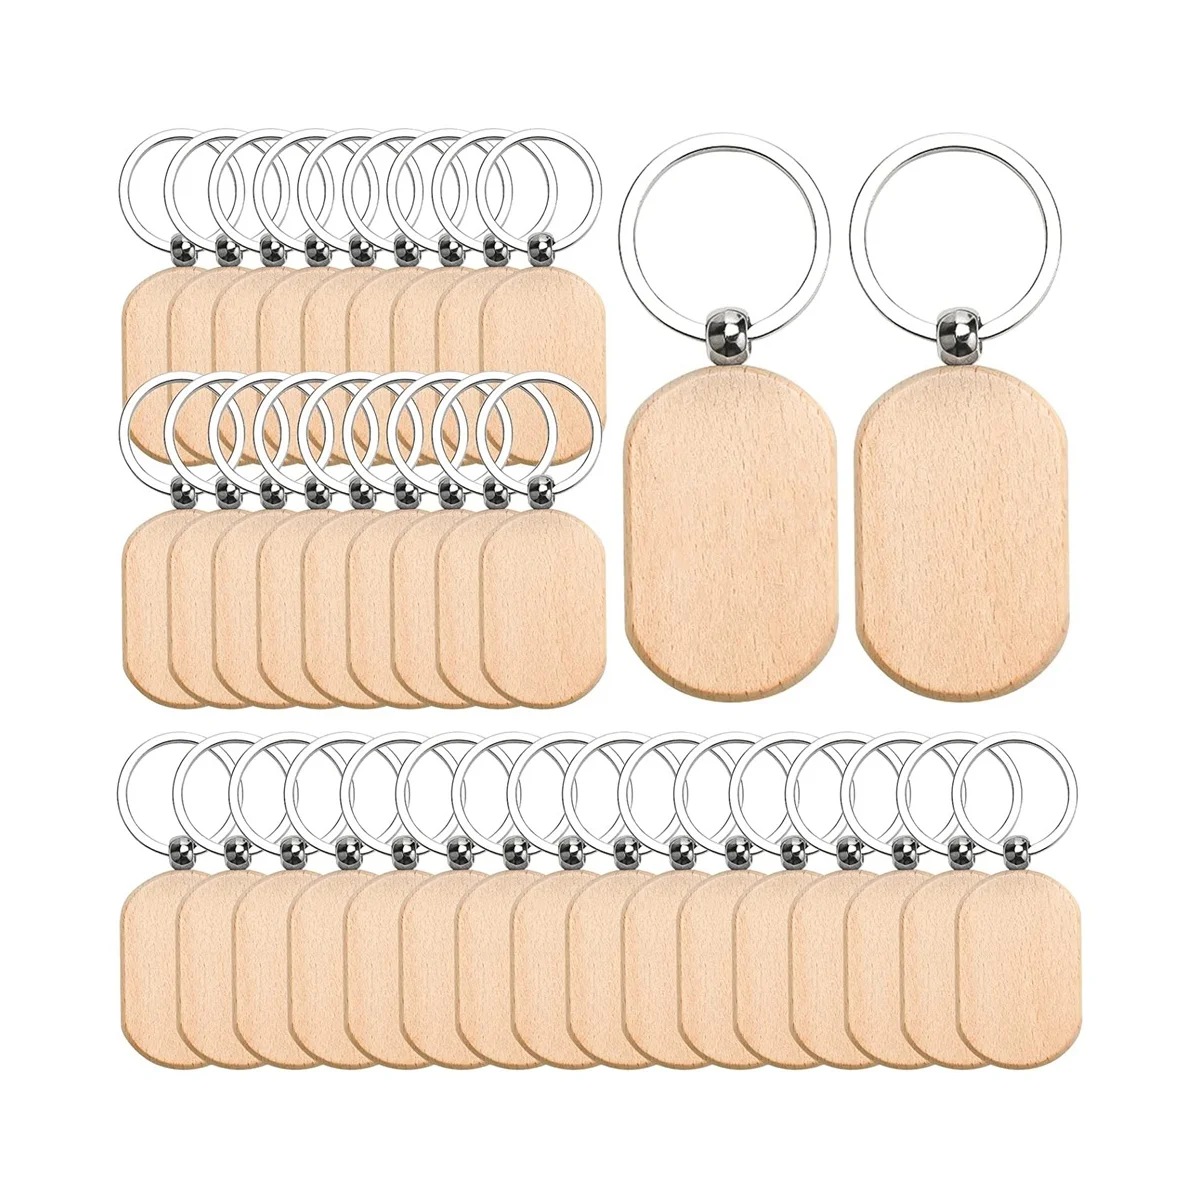 

110PCS Wood Keychain Blanks, Unfinished Wood Key Tag, Wood Engraving Blanks Key Chain for DIY Crafts-Rounded Square